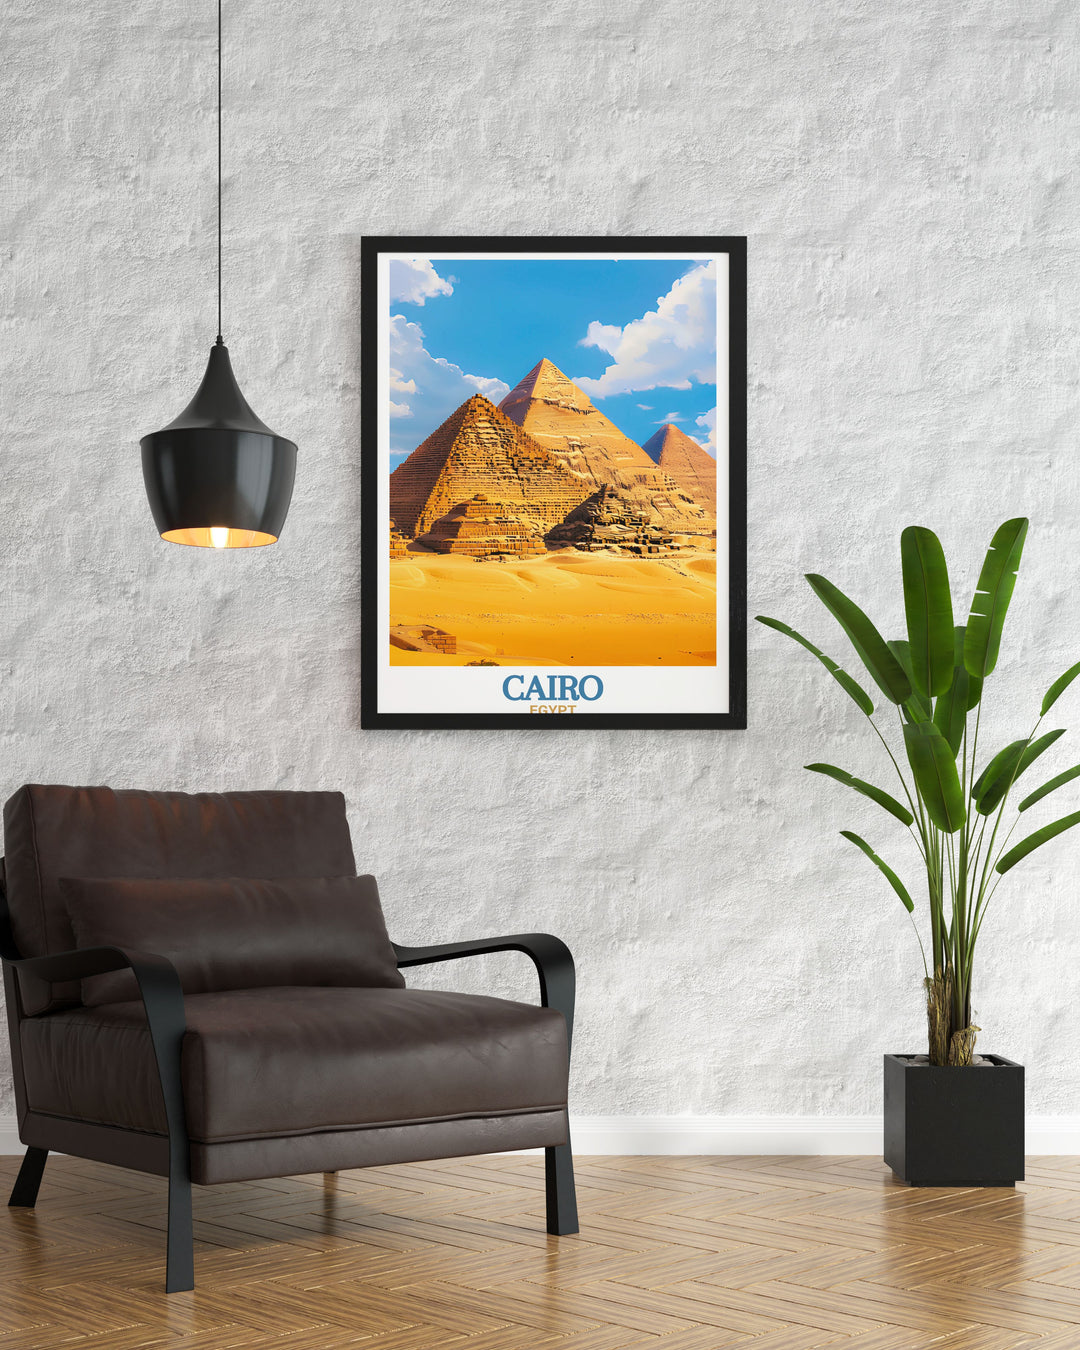 Enhance your home with this minimal travel art featuring The Pyramids of Giza against the Cairo skyline a perfect piece for those who appreciate unique and captivating cityscape photography and vintage style.